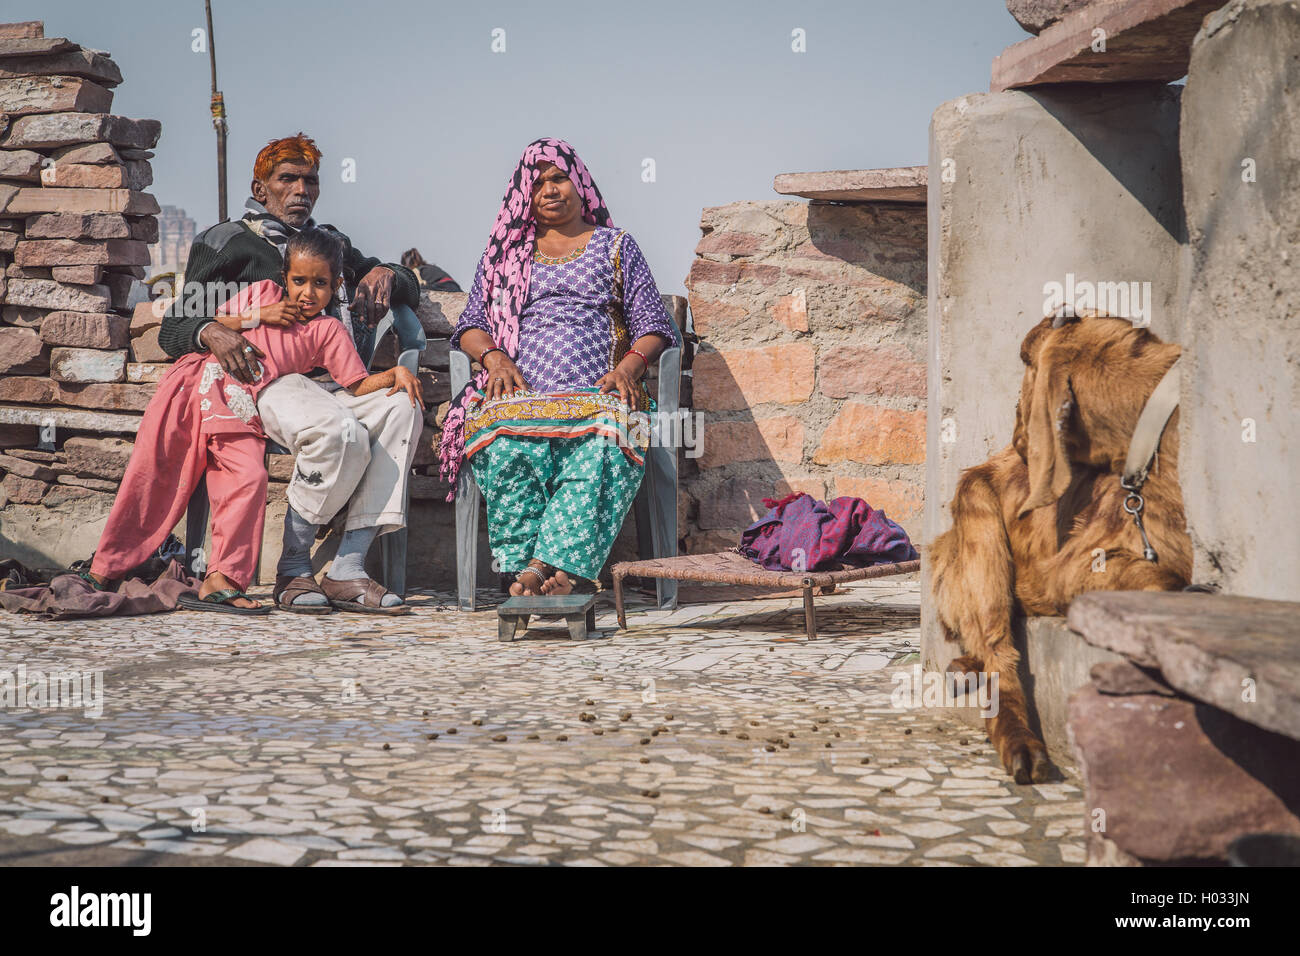 JODHPUR, INDIA - 09 FEBRUARY 2015: Grandparents rest with granddaughter in courtyard of home with goat sitting close by. Post-pr Stock Photo